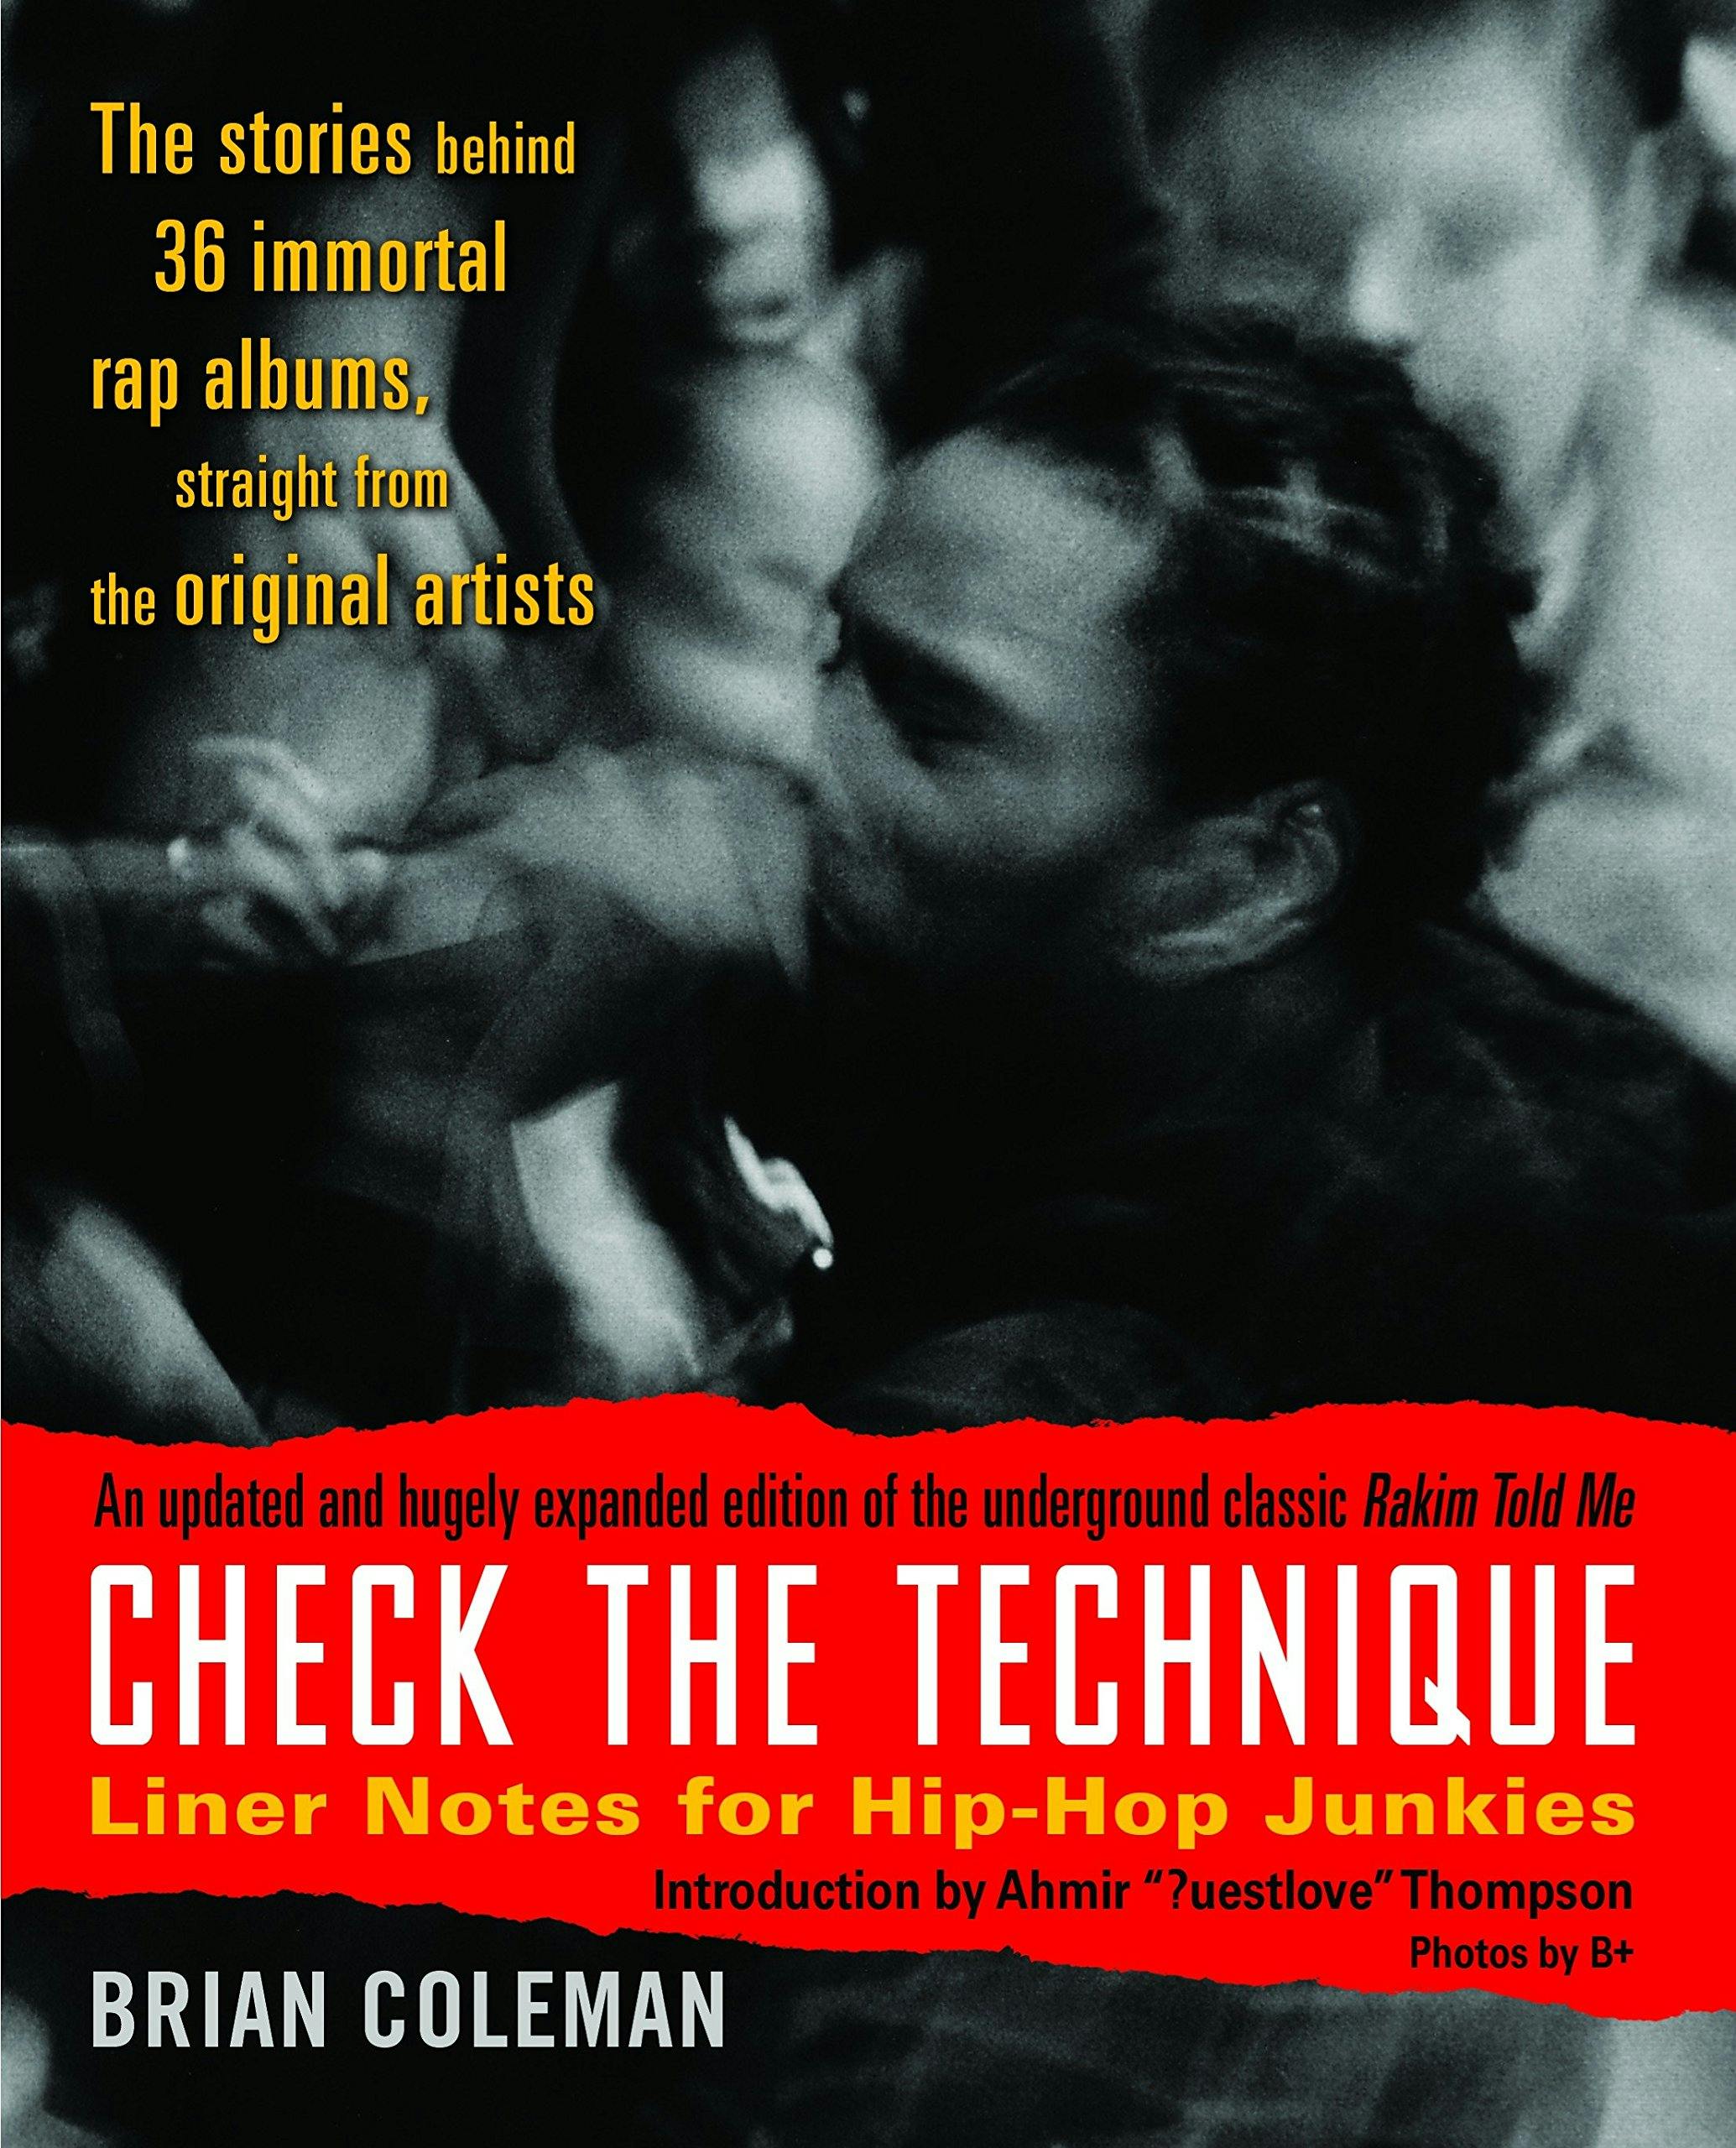 ‘Check the Technique: Liner Notes for Hip-Hop Junkies’ by Brian Coleman